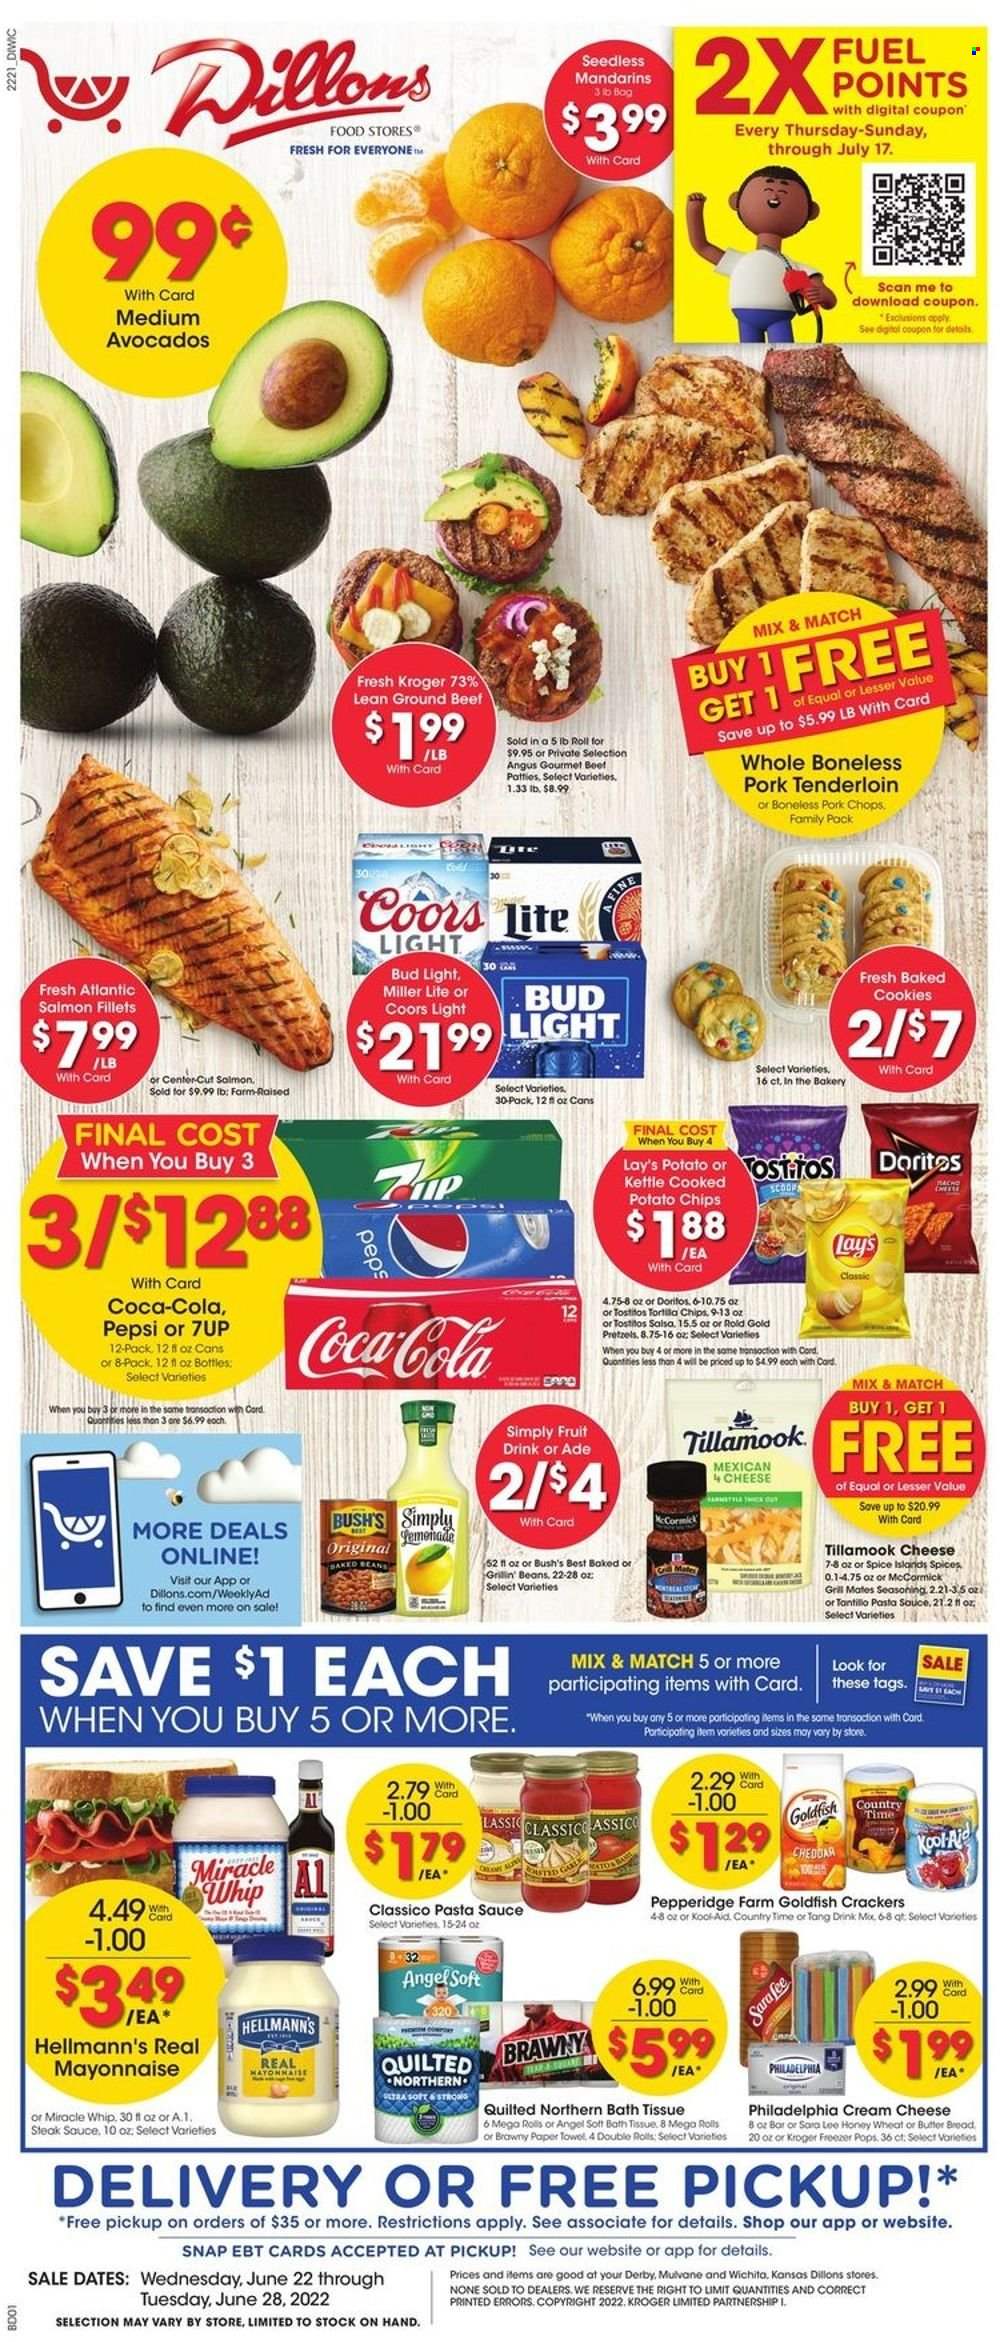 Dillons ad  - 06.22.2022 - 06.28.2022.